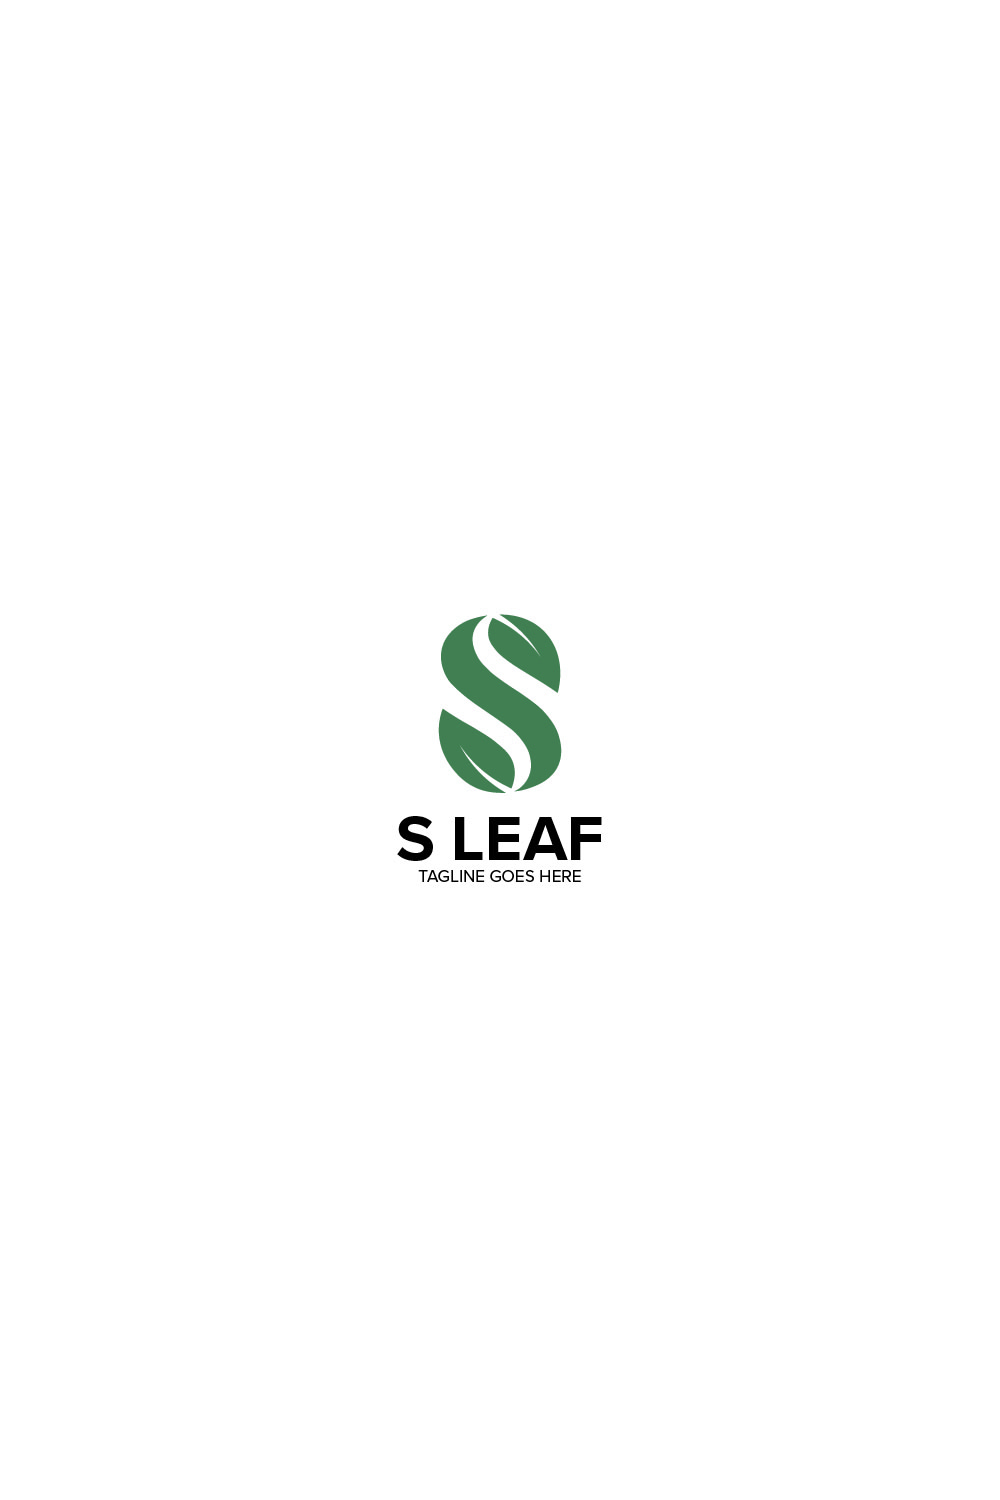 Initial Letter S logo with green leaf design pinterest preview image.